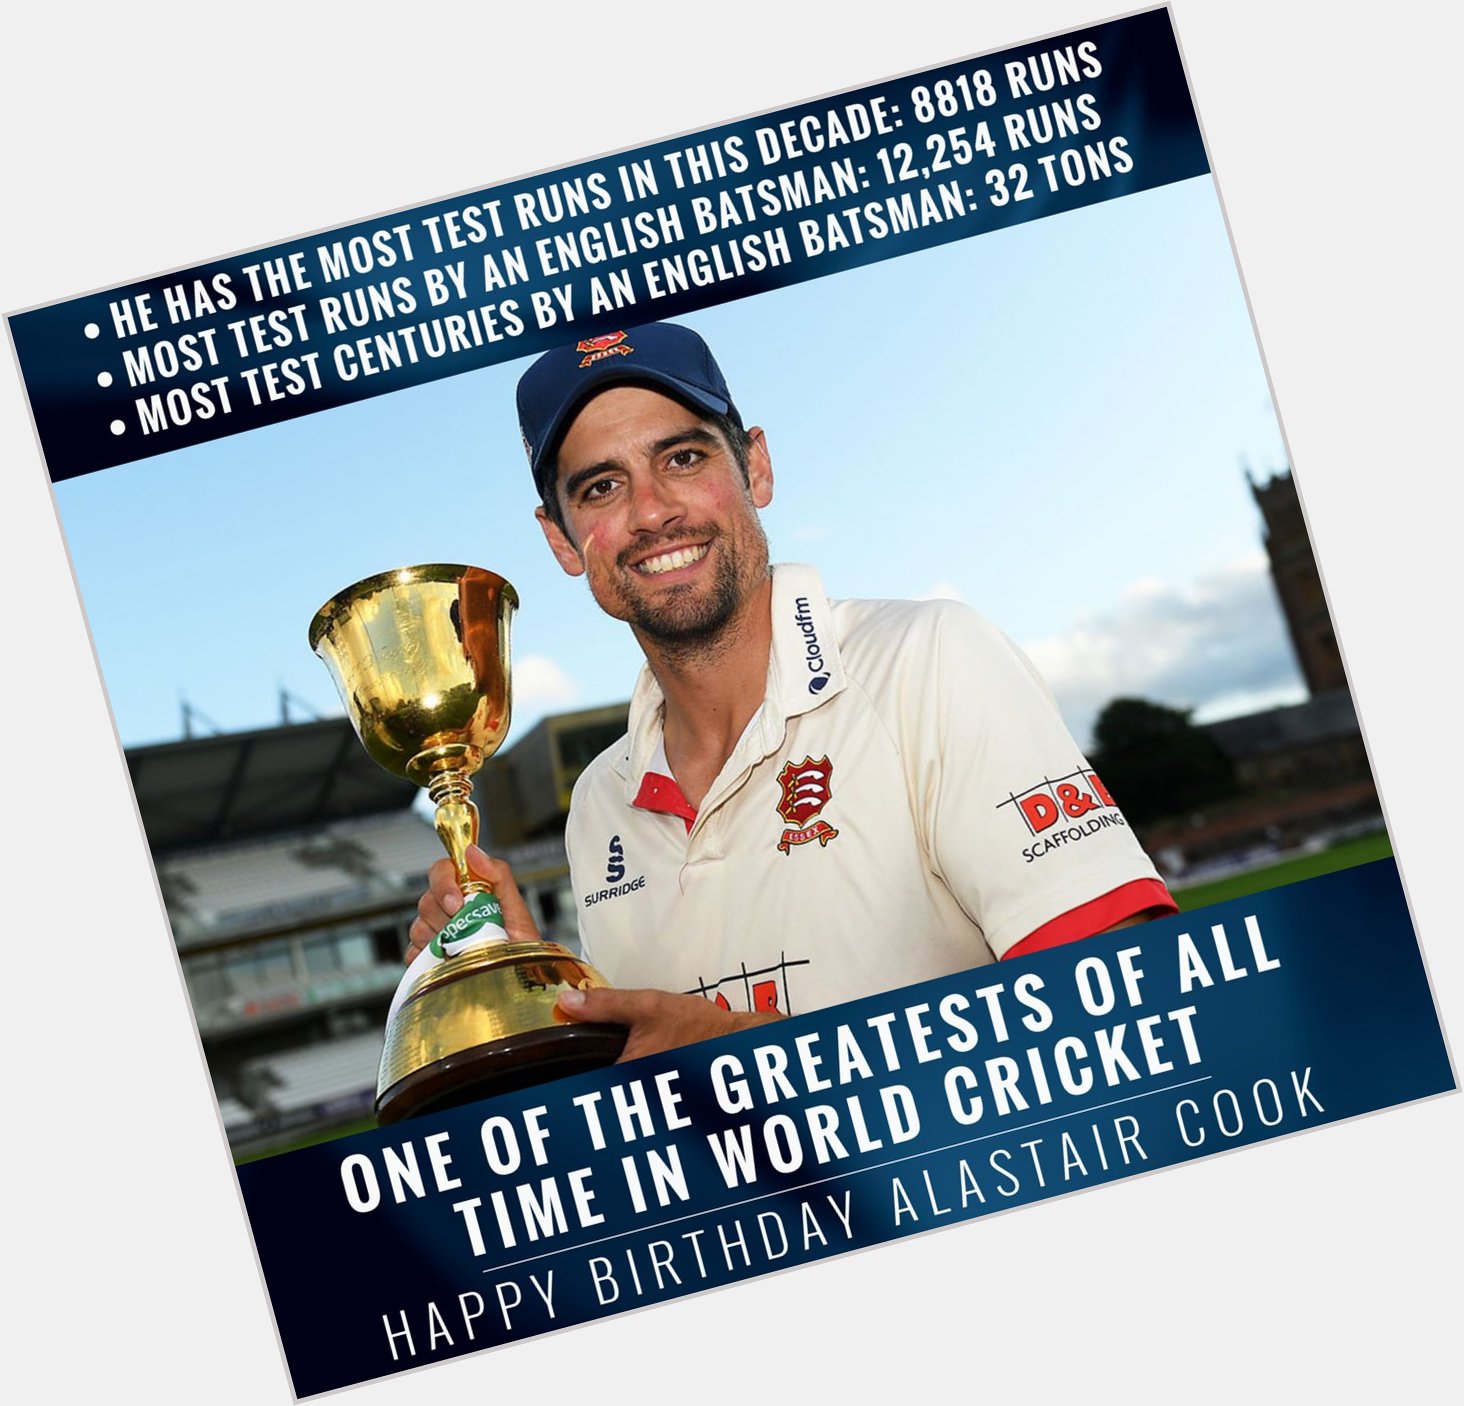 Sir Alastair Cook turns 35 today. Join us in wishing him a very happy birthday. 